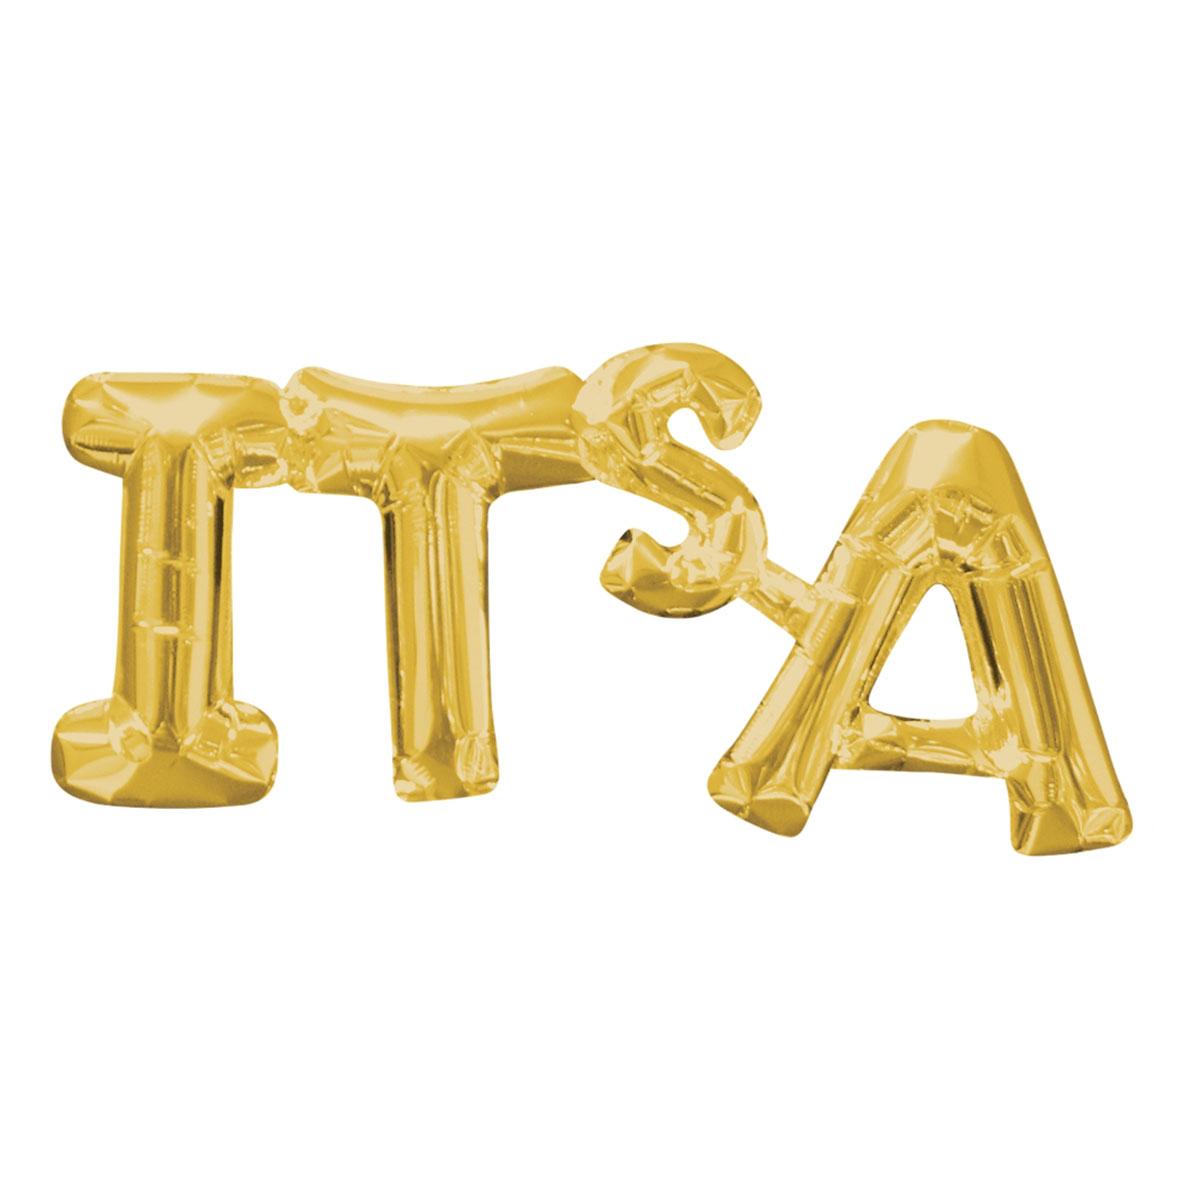 It's A Gold Phrase Foil Balloon 29x9in Balloons & Streamers - Party Centre